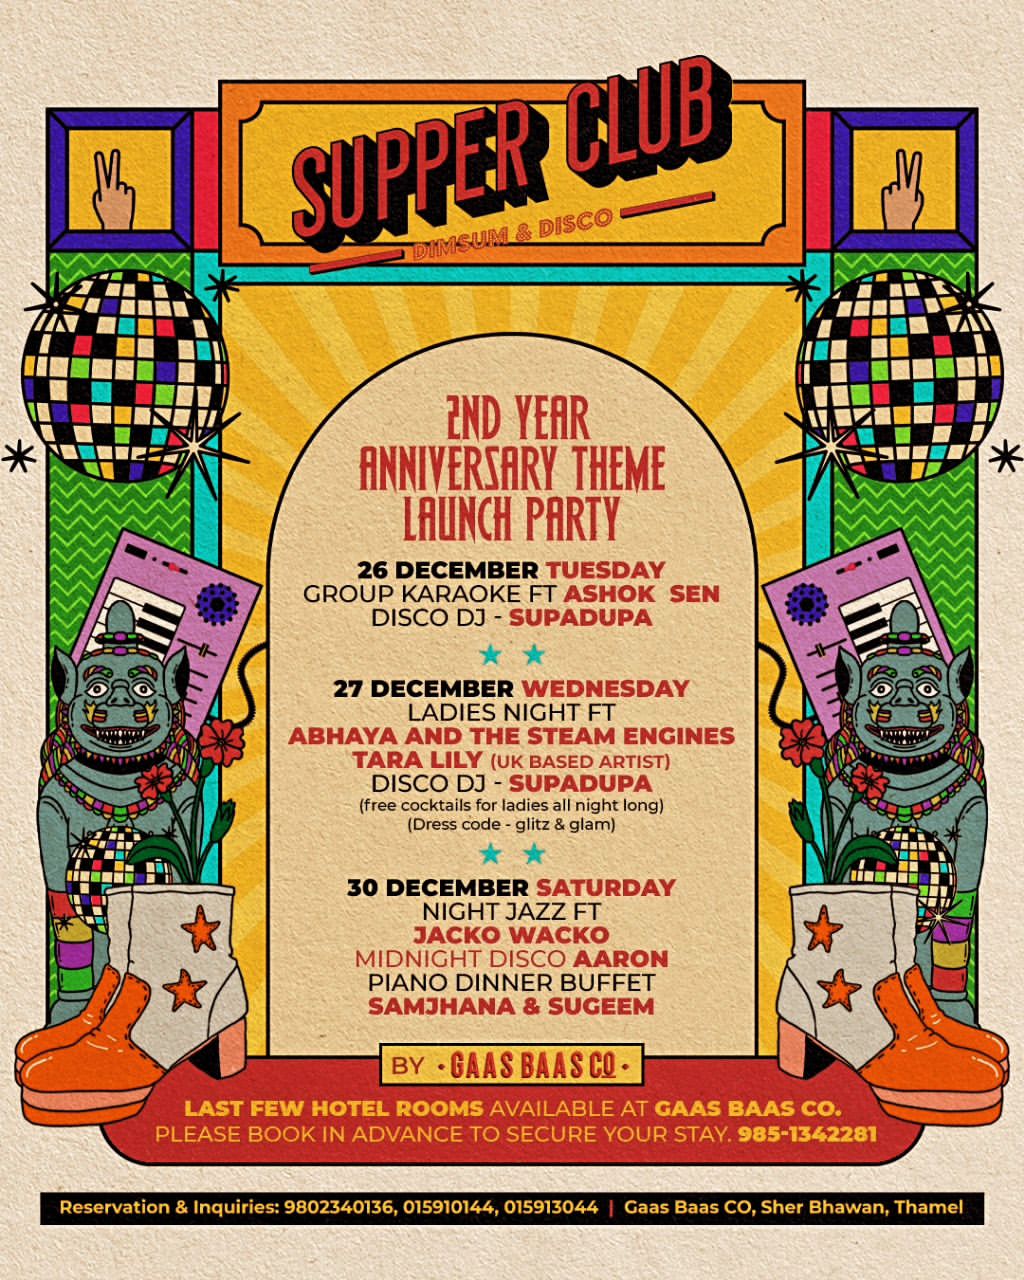 2nd year anniversary of Supper Club